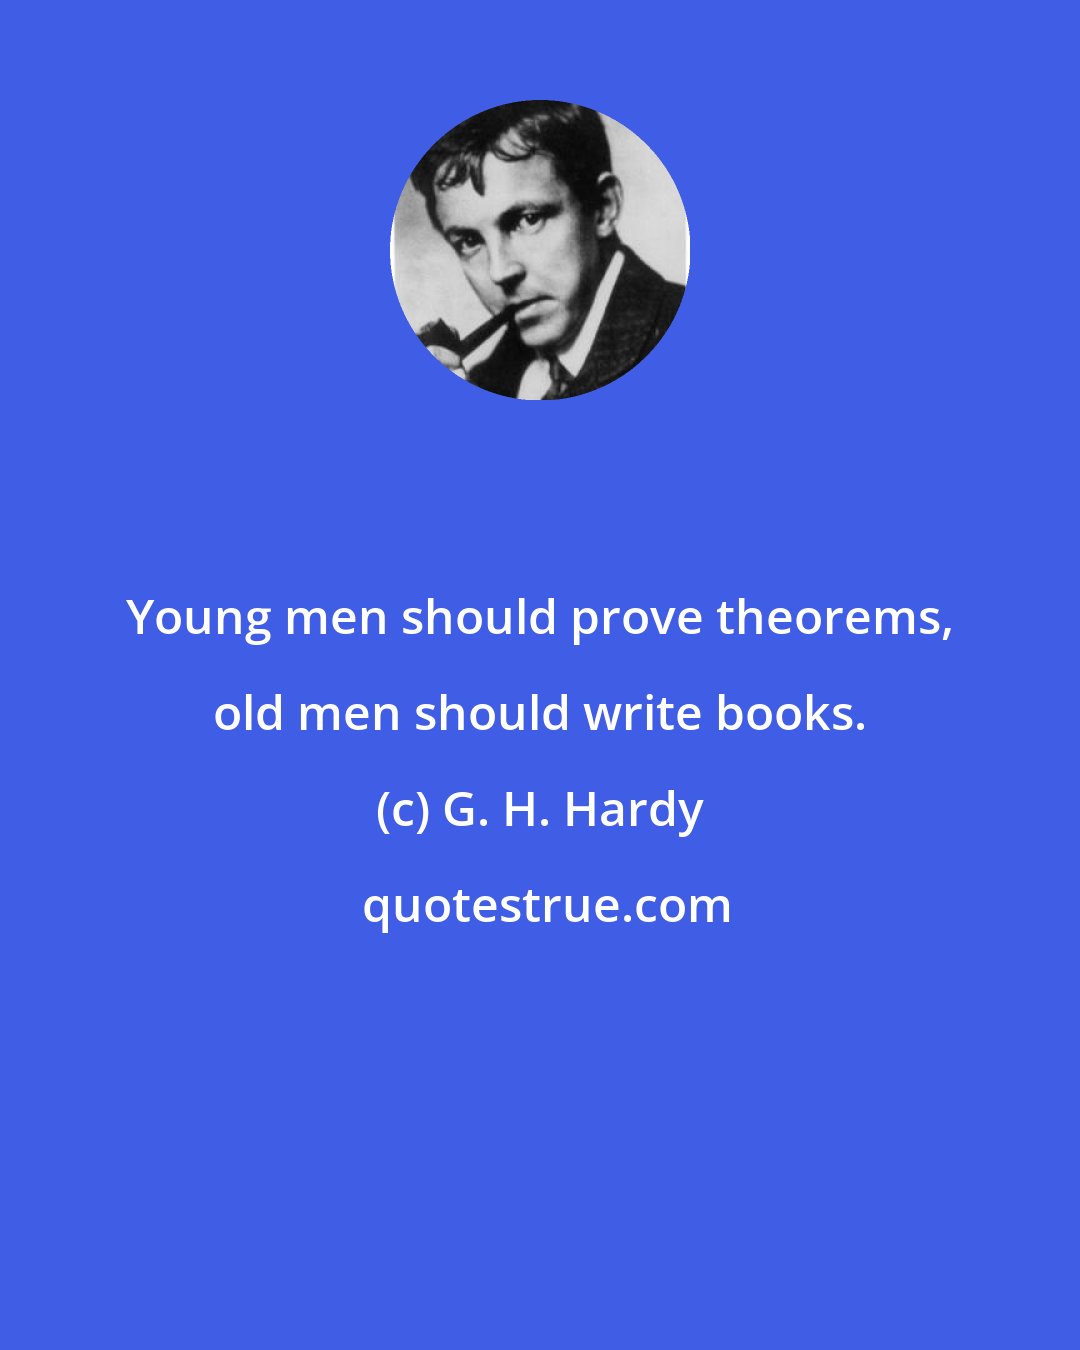 G. H. Hardy: Young men should prove theorems, old men should write books.